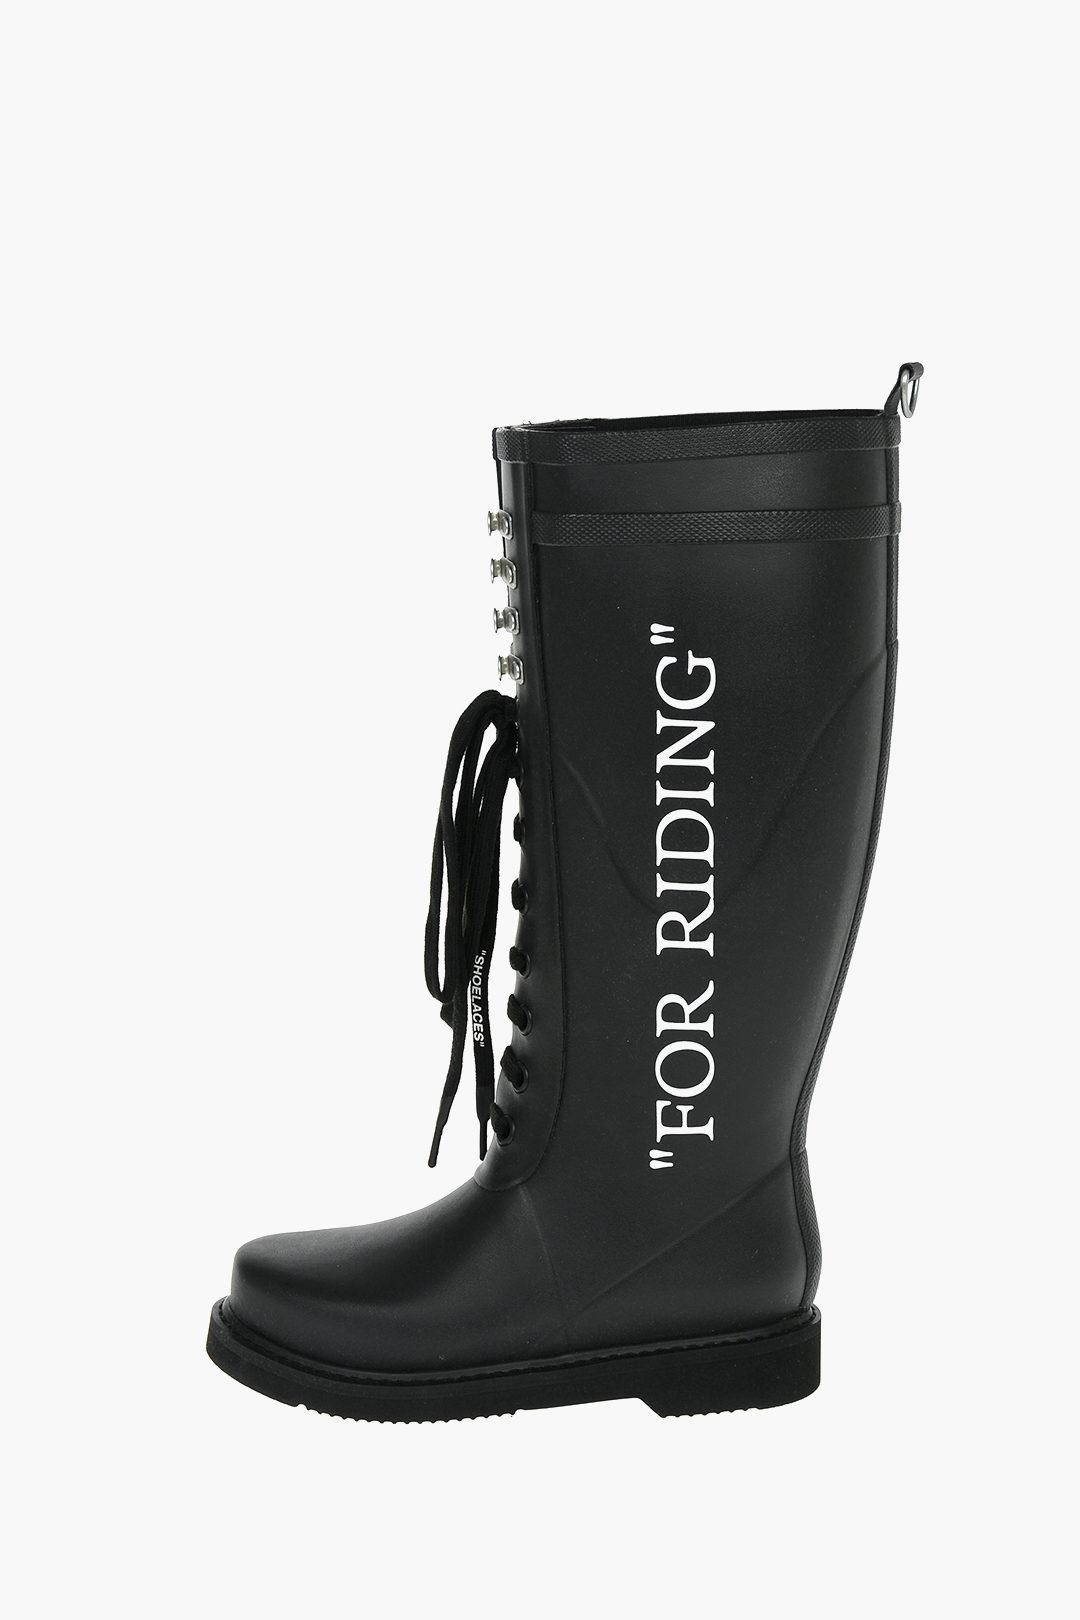 Off-White Lace-up WELLINGTON Knee-high Boots with FOR RIDING Print ...